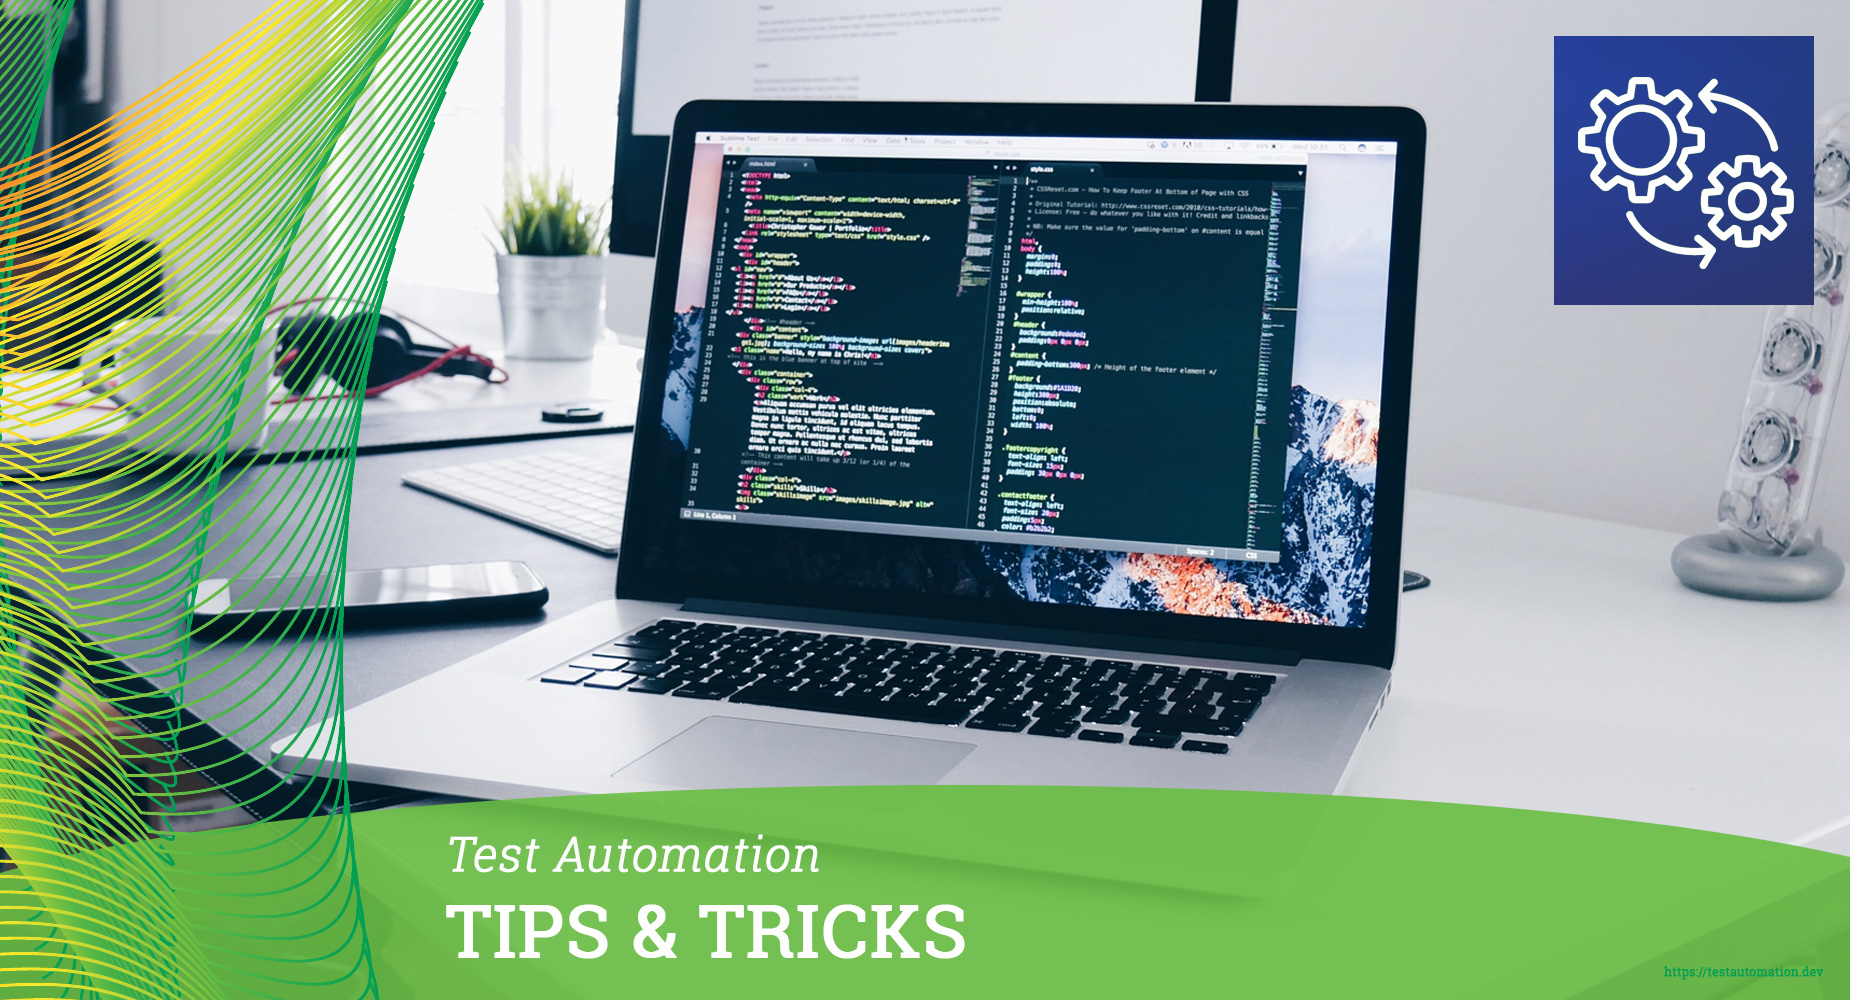 Test Automation tips and tricks